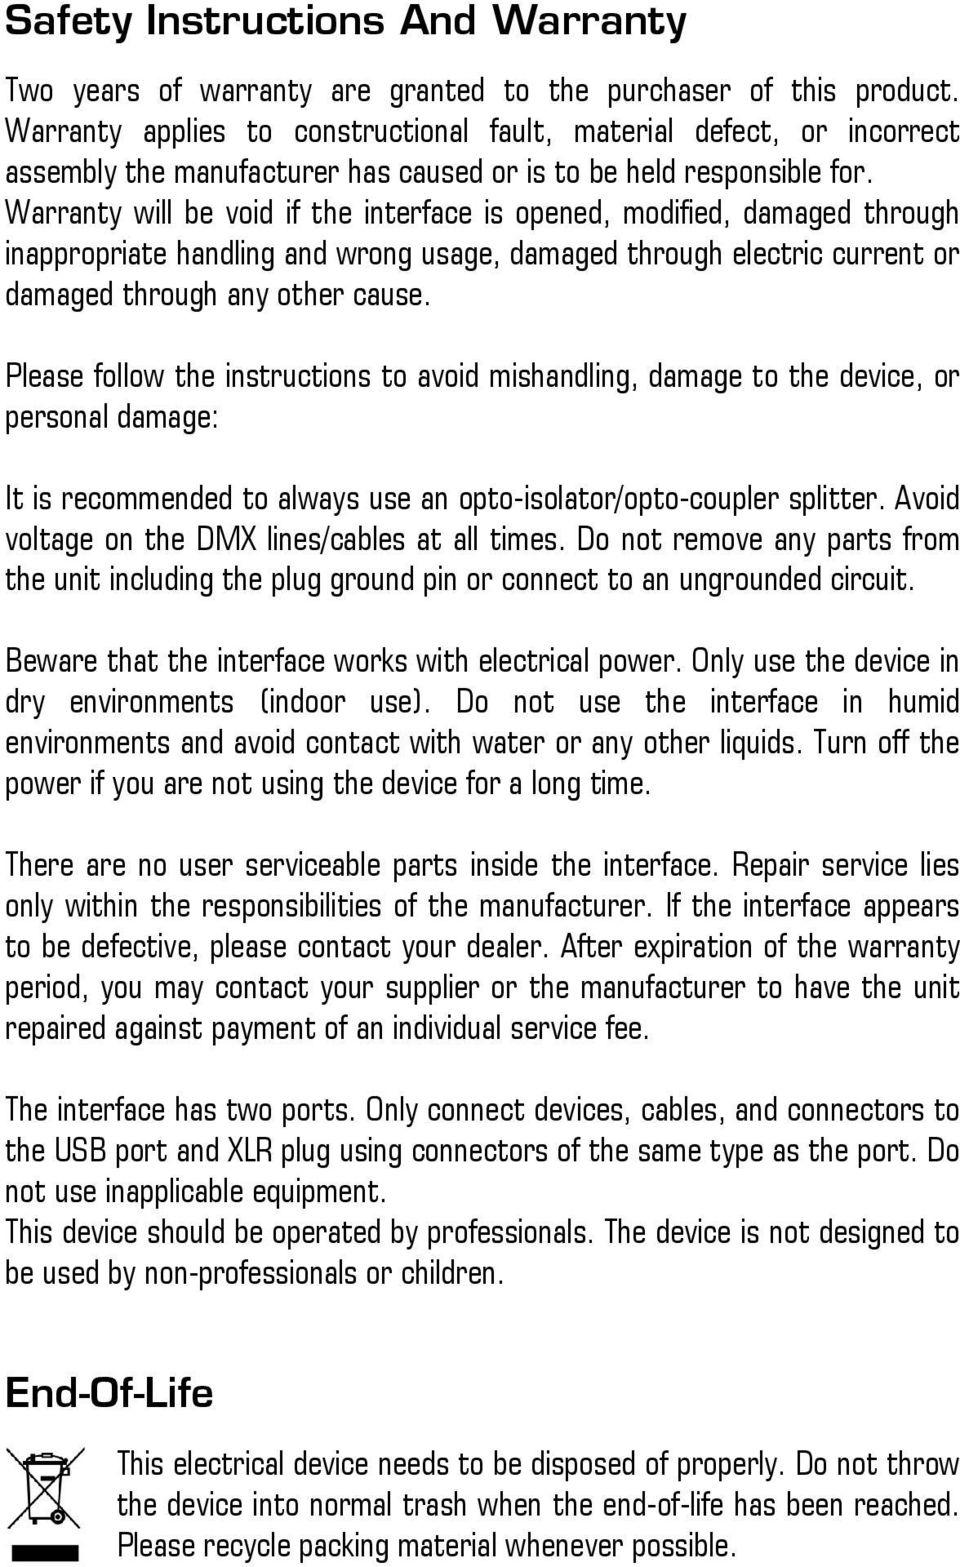 Warranty will be void if the interface is opened, modified, damaged through inappropriate handling and wrong usage, damaged through electric current or damaged through any other cause.